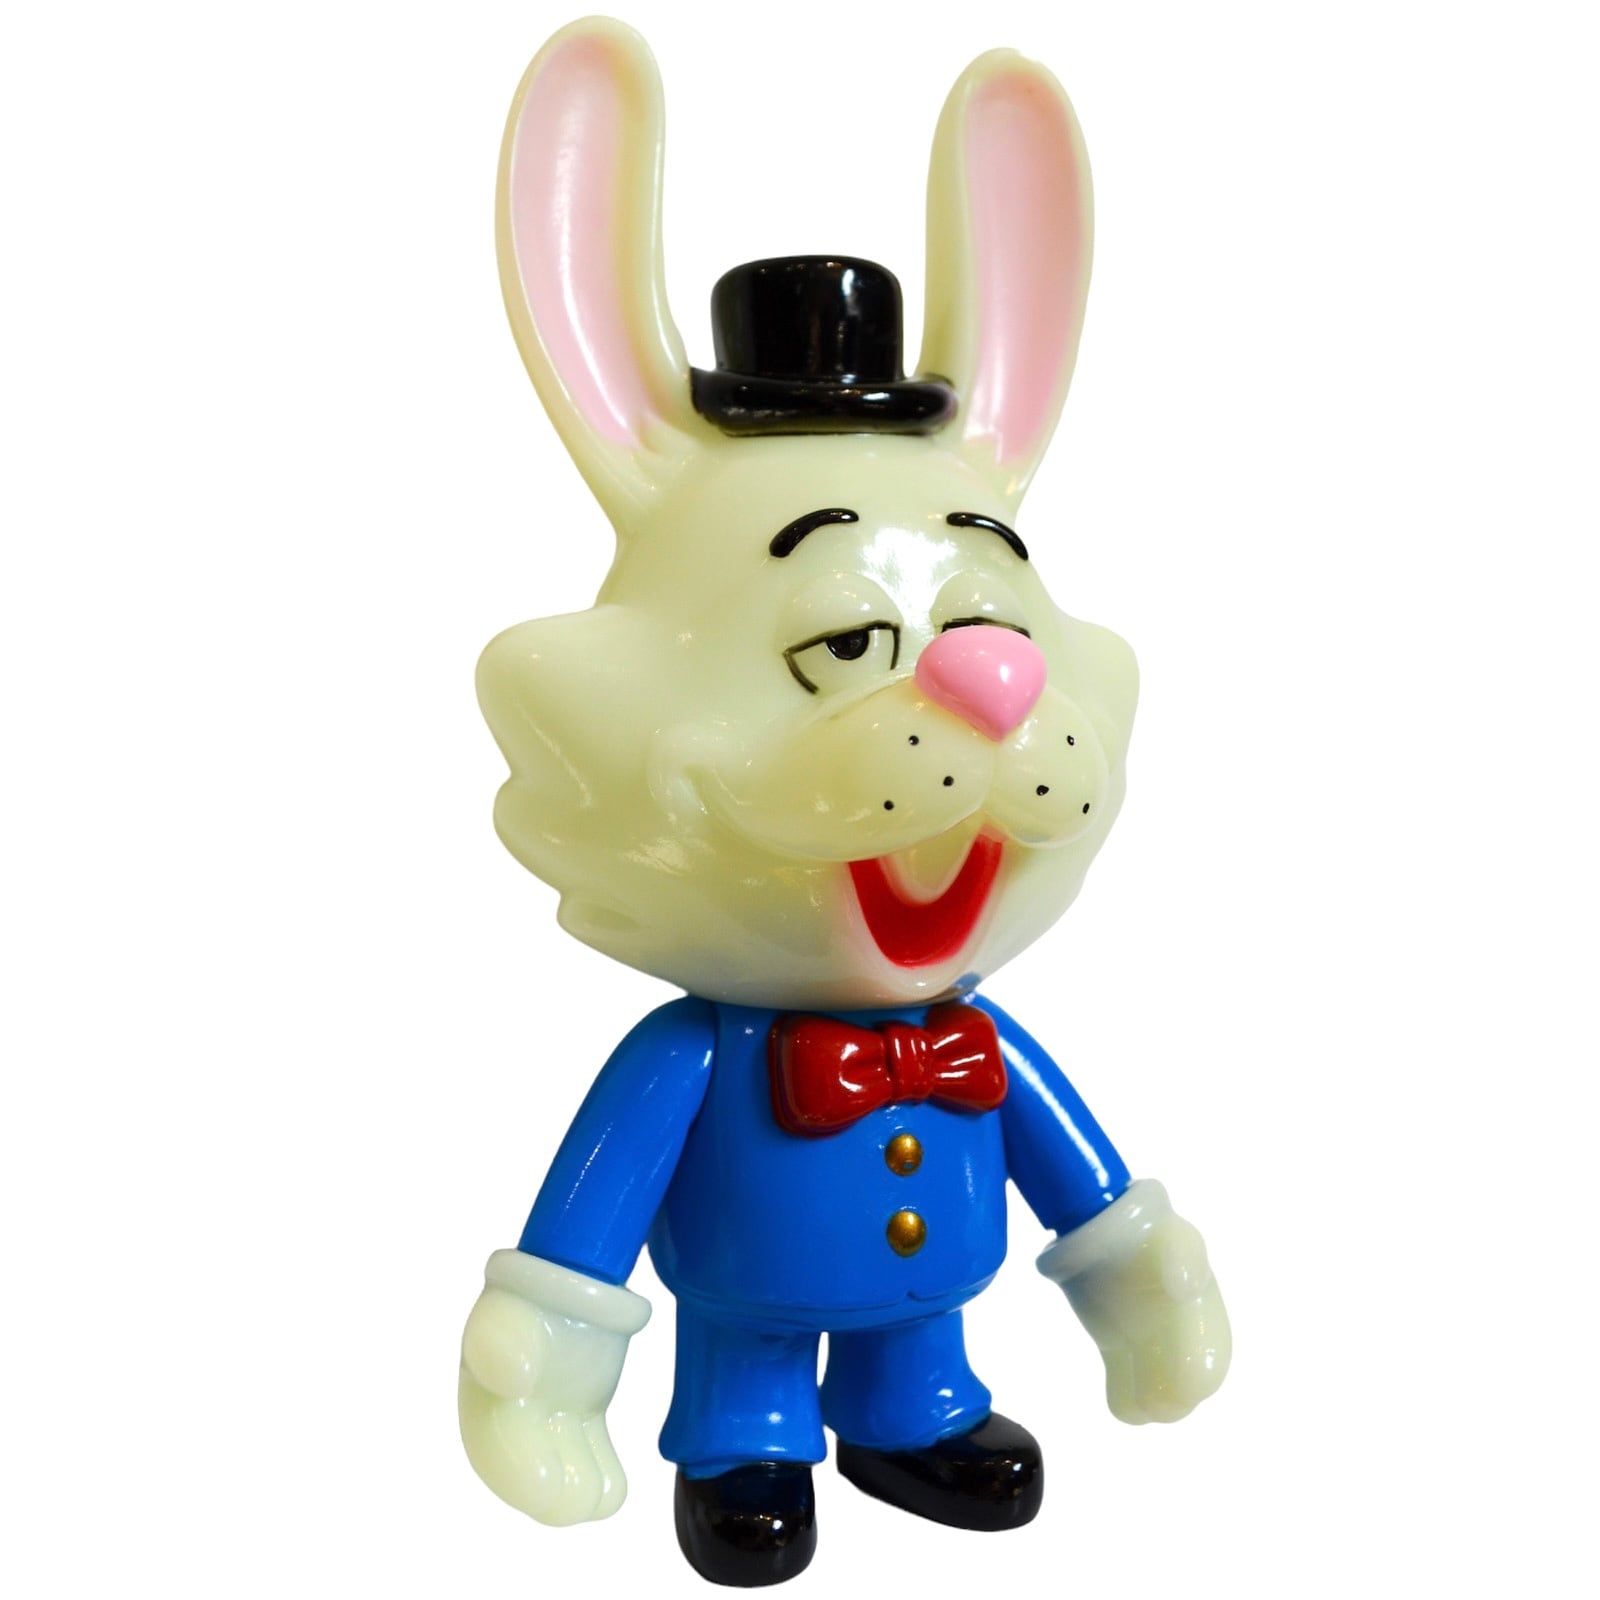 SWING TOYS】SWING BUNNY (G.I.D.) | HEIGHTS Online Store